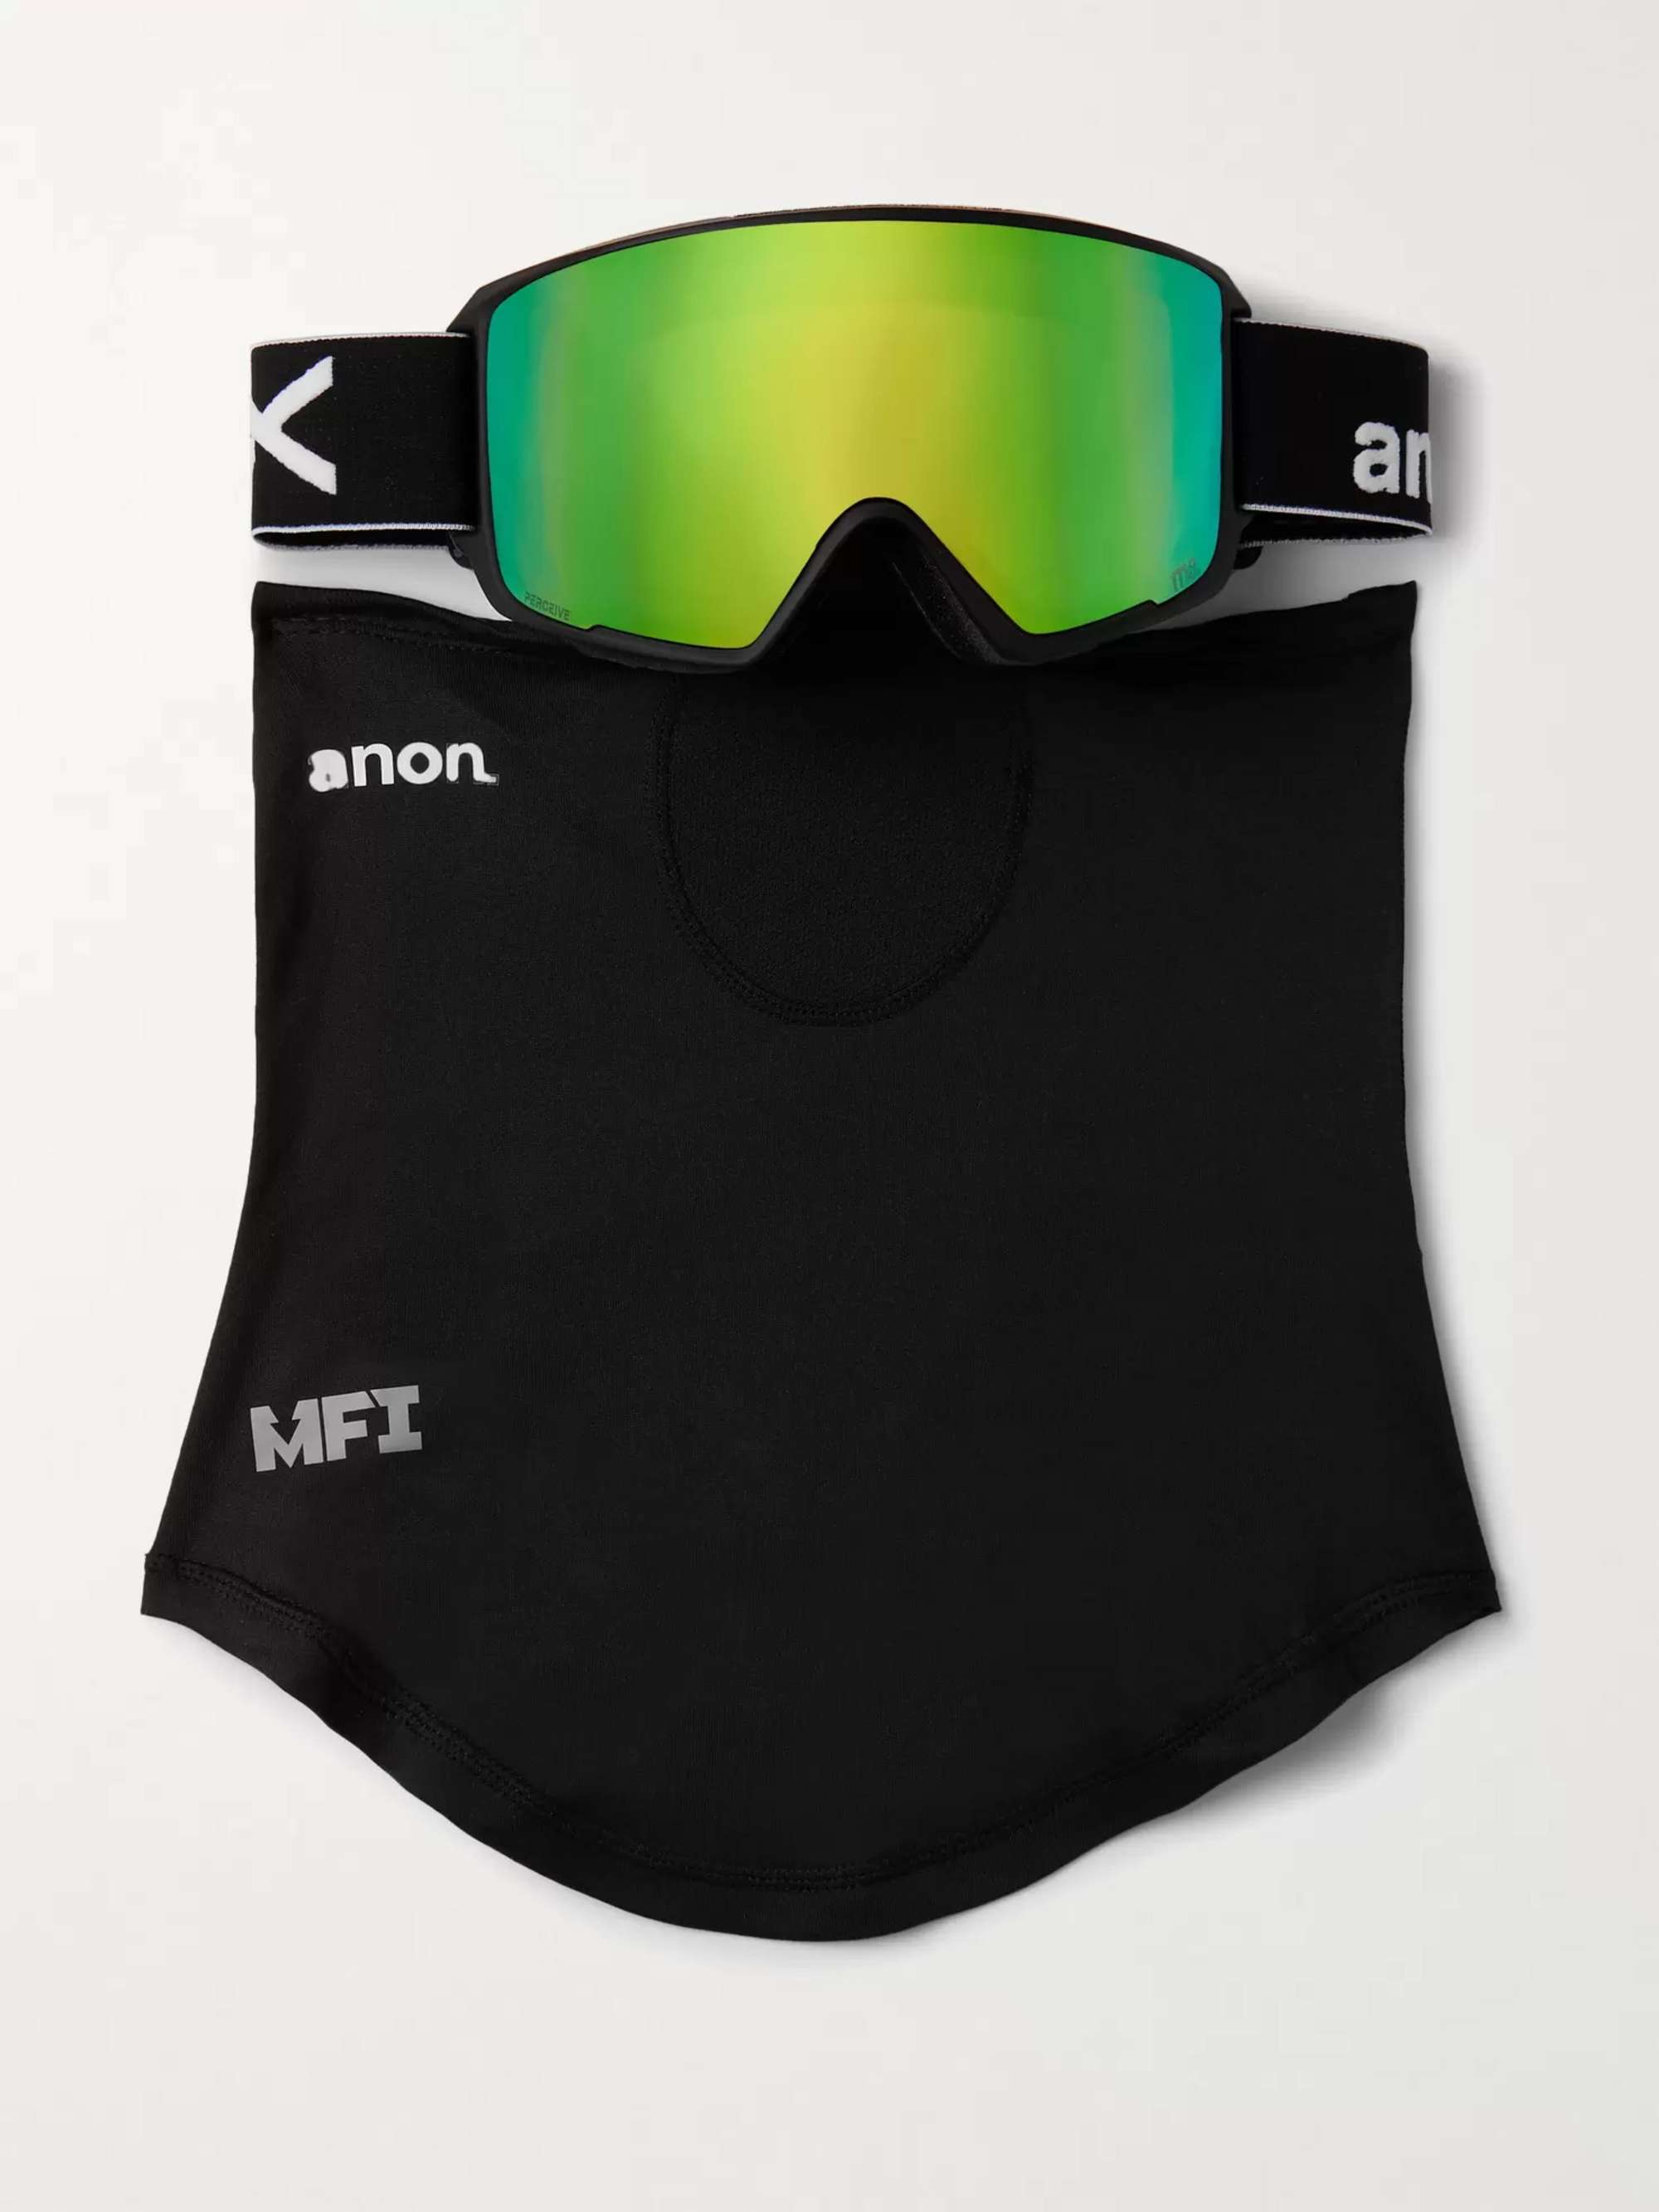 ANON M3 Ski Goggles and Stretch-Jersey Face Mask